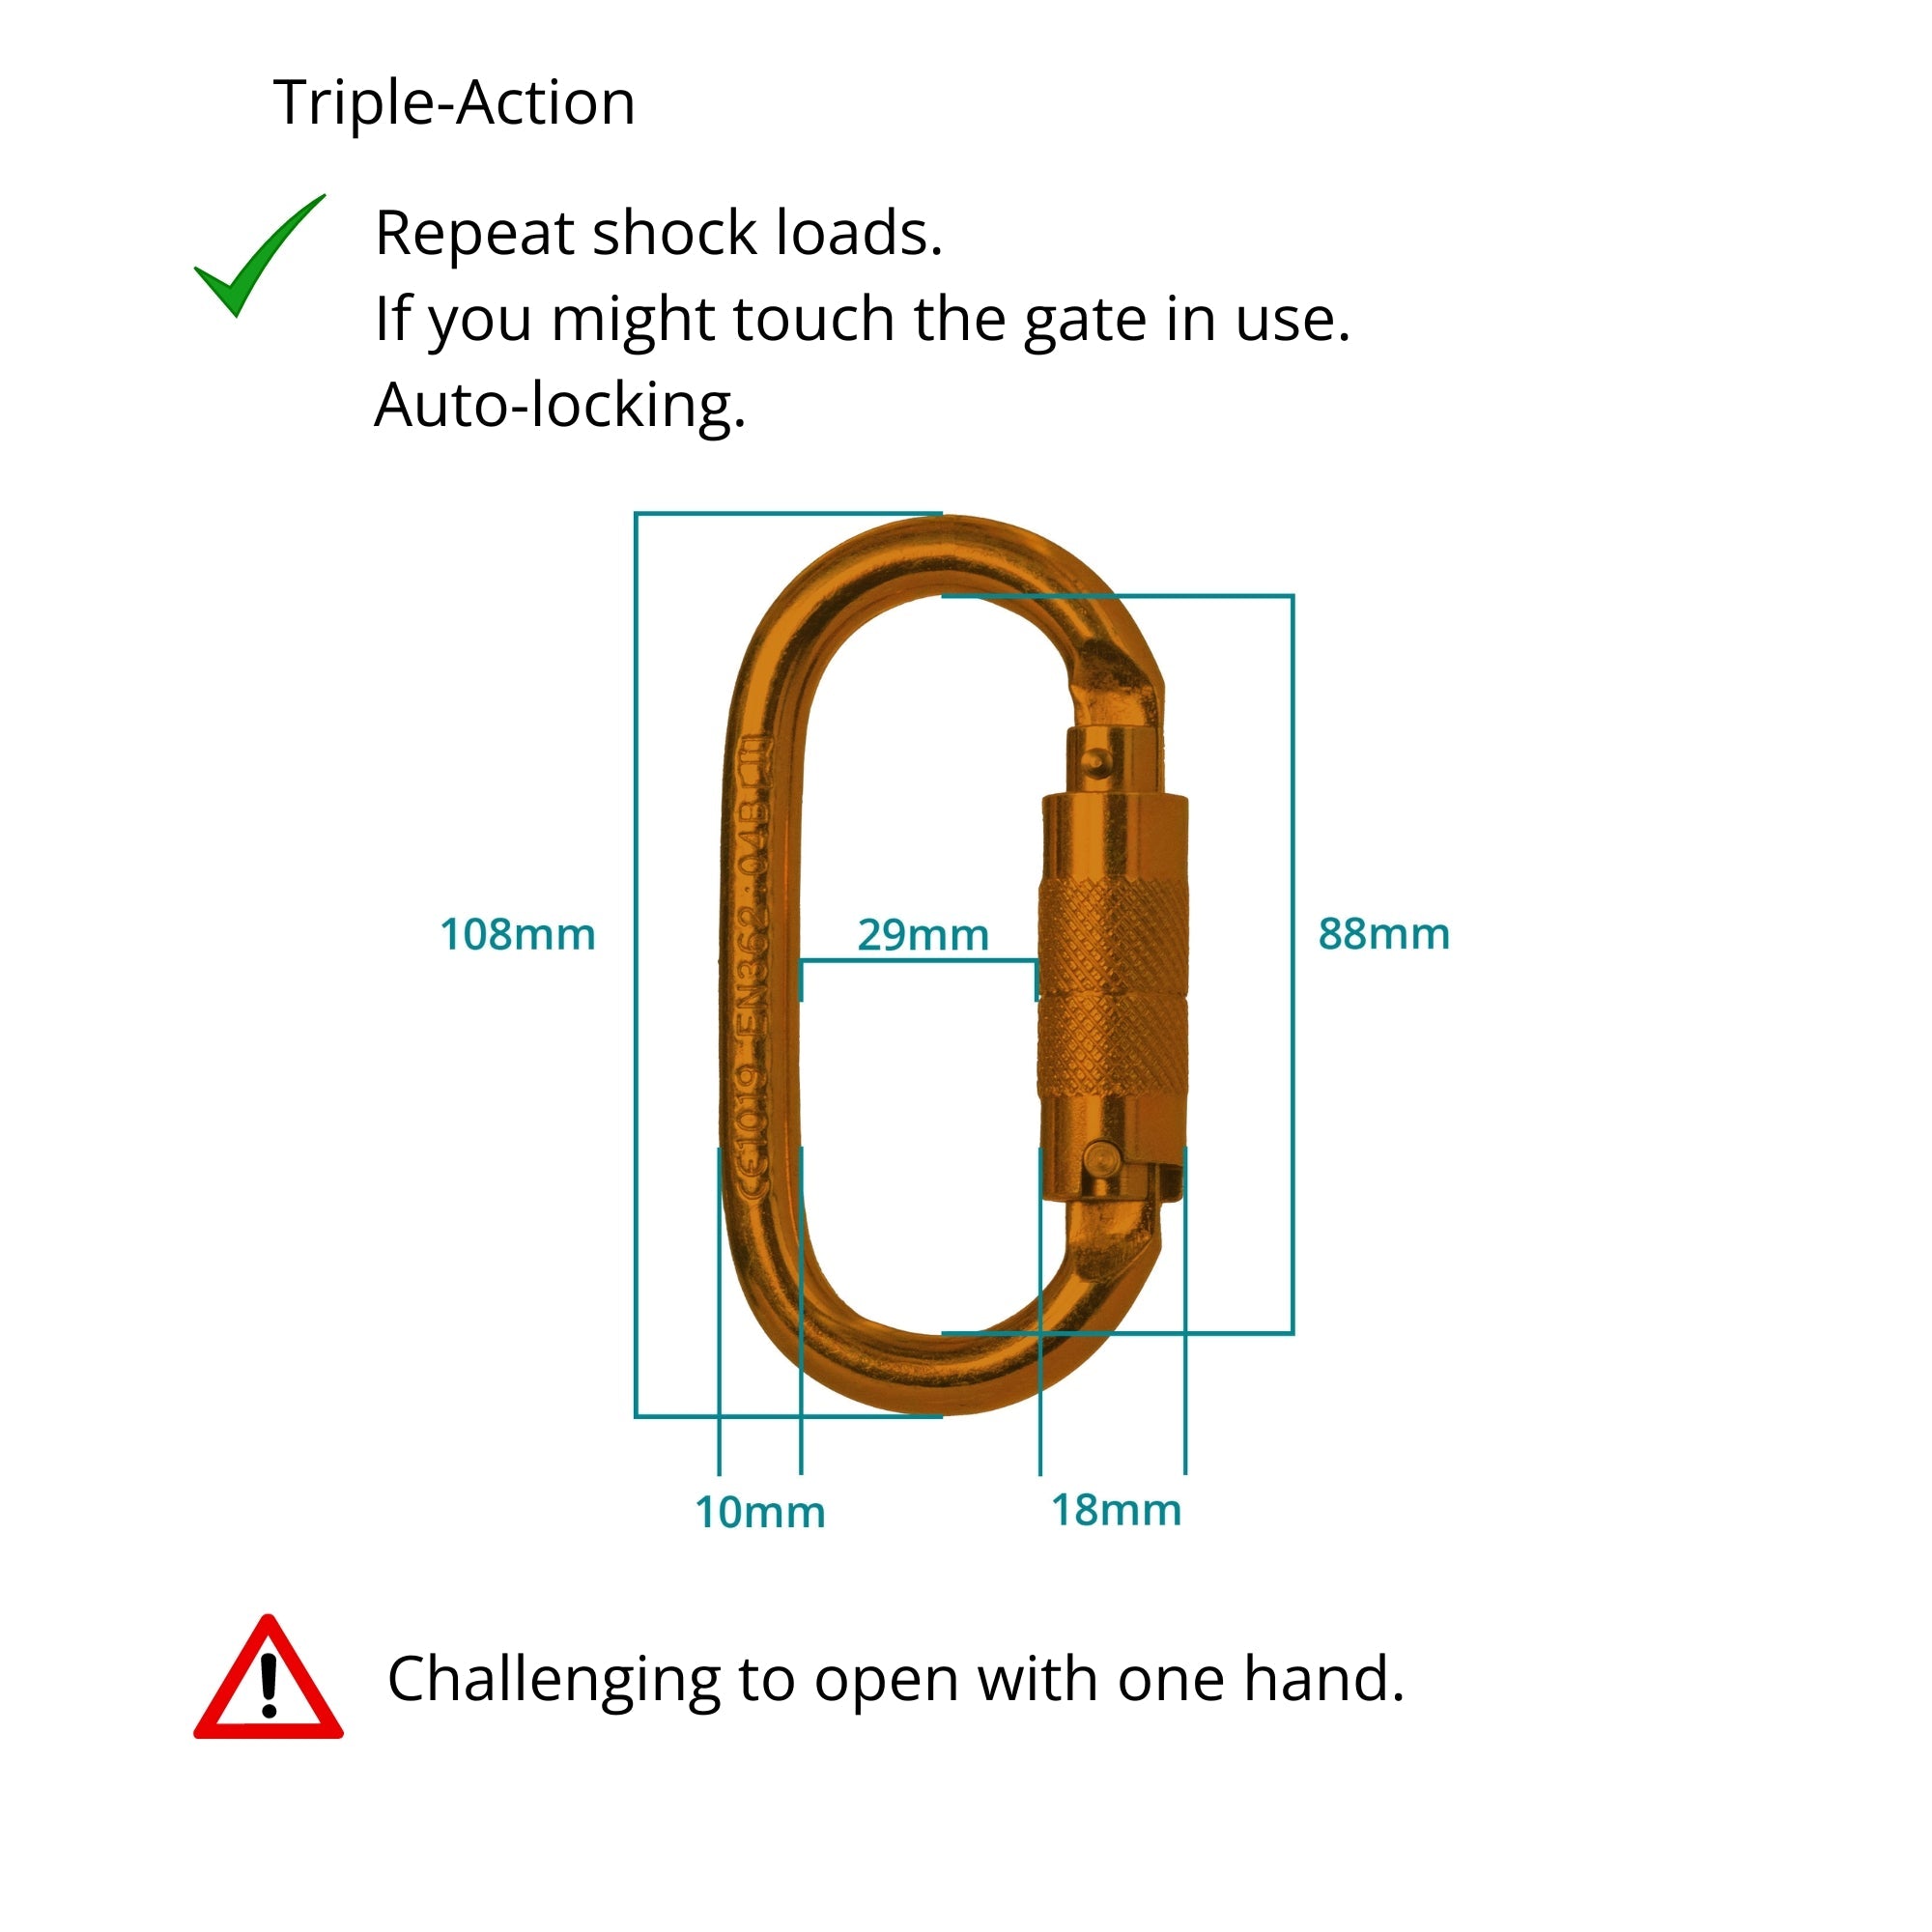 triple action carabiner measurements and info